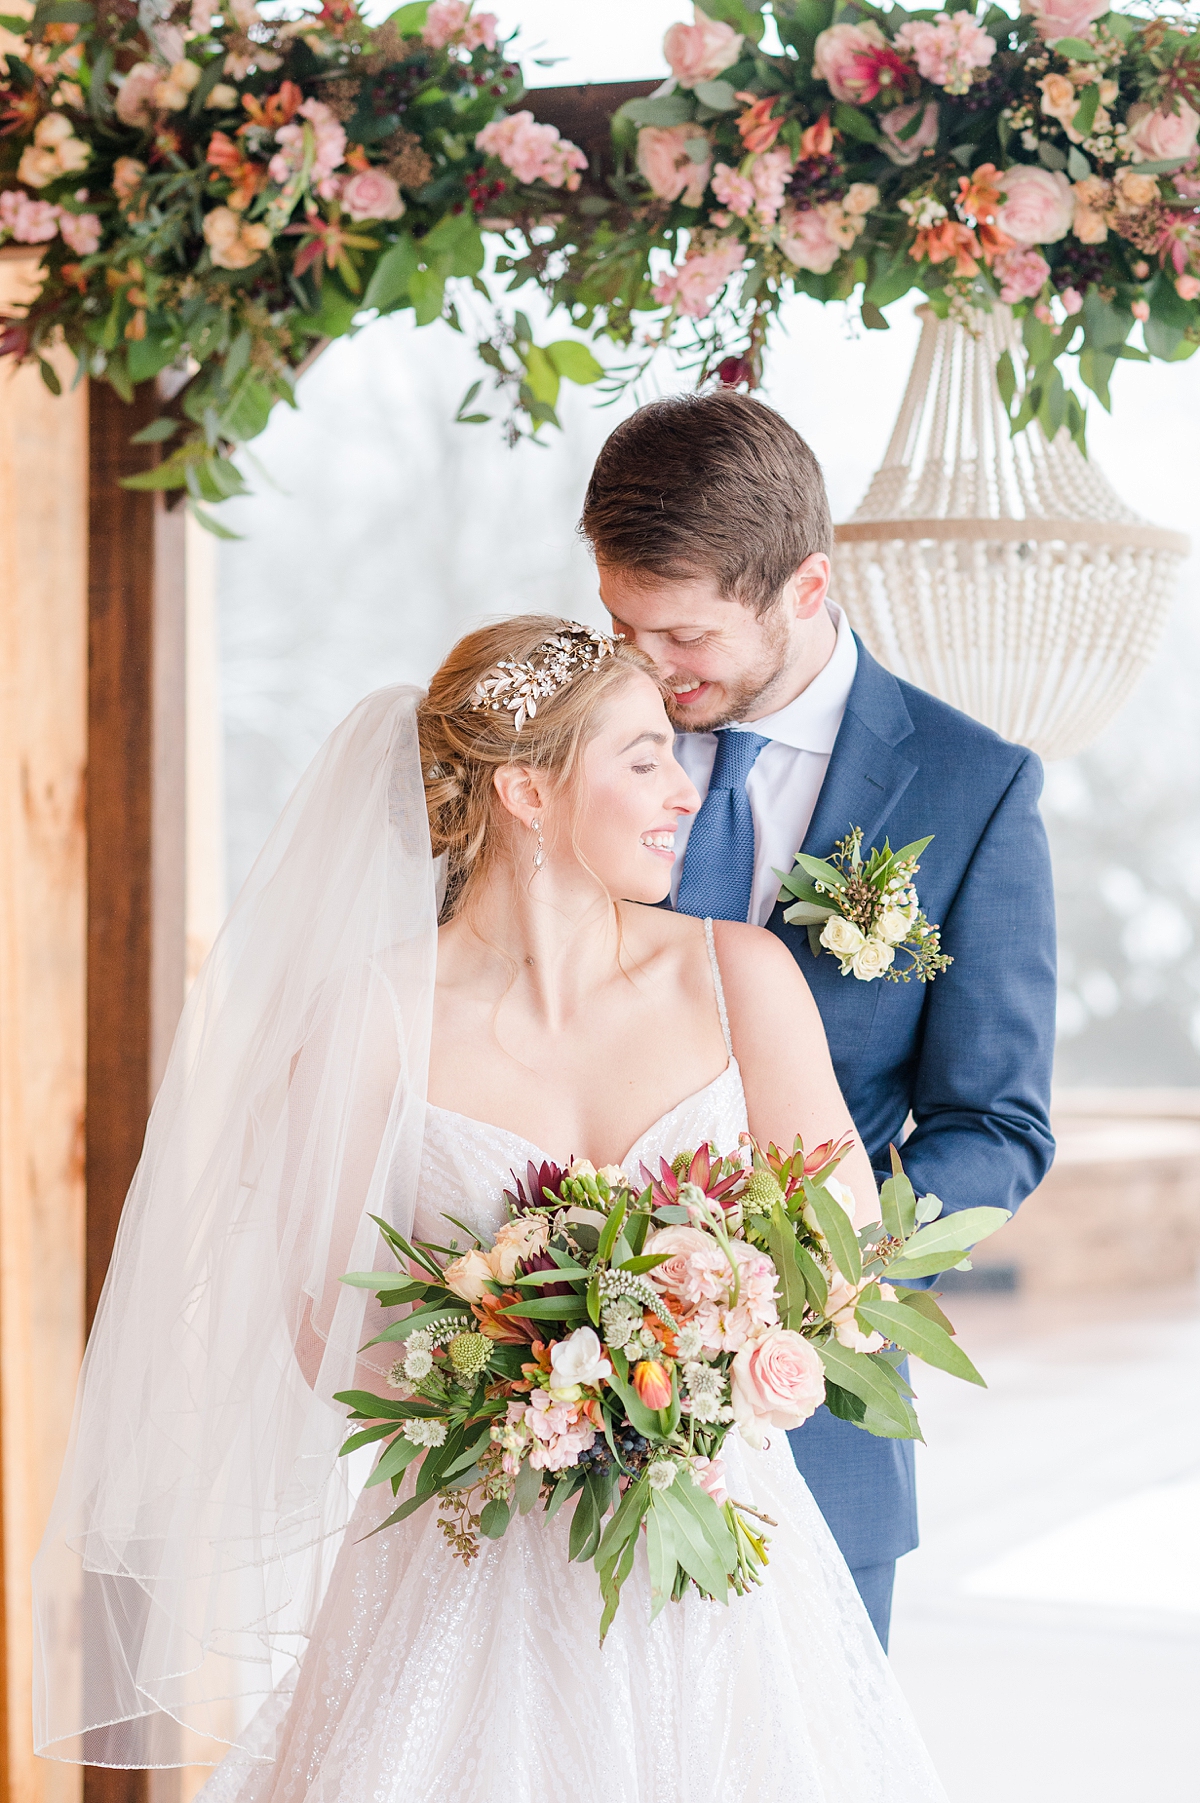 Winter East View Farms Wedding Styled Shoot with Amanda's Touch Bridal and Glo Out Galmour Bar. Heather Lea Events and Virginia Wedding Photographer Kailey Brianne Photography. 